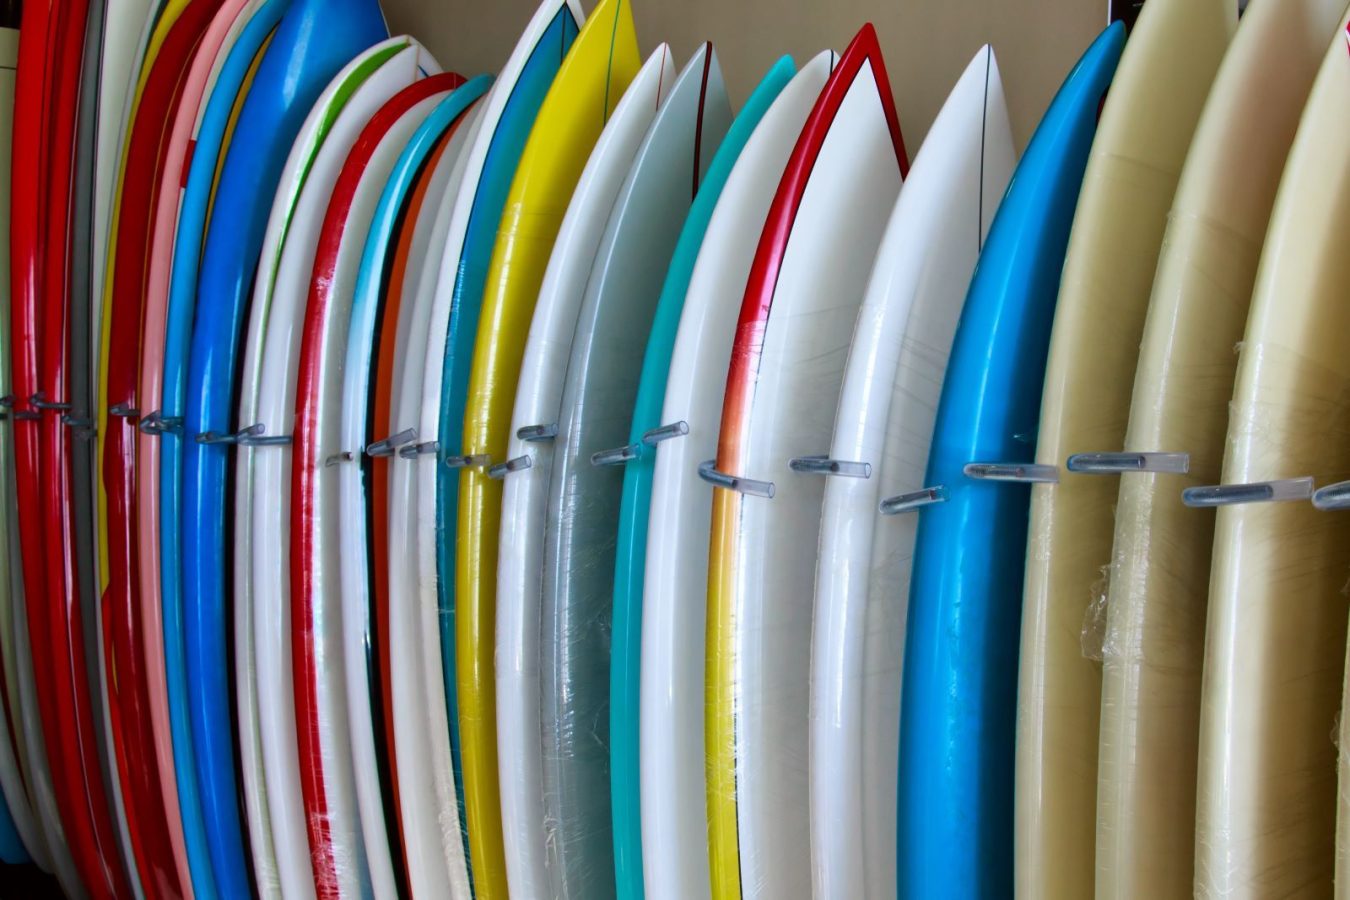 surf-boards-in-rack-at-store